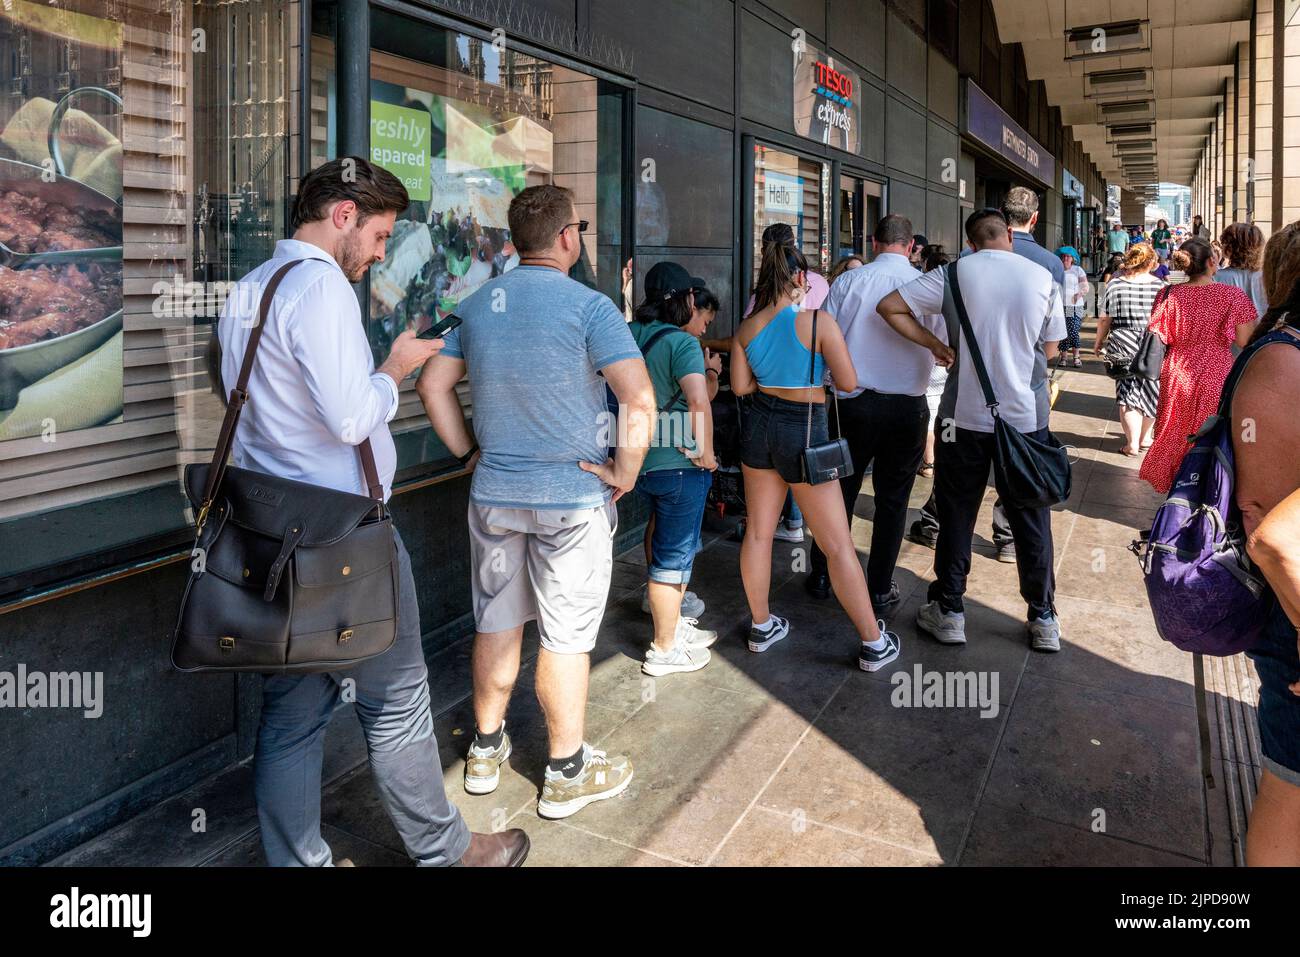 People Queue For Cold Drinks Outside Tesco Express Supermarket In Westminster On The Hottest Day Ever Recorded In London, London, UK. Stock Photo